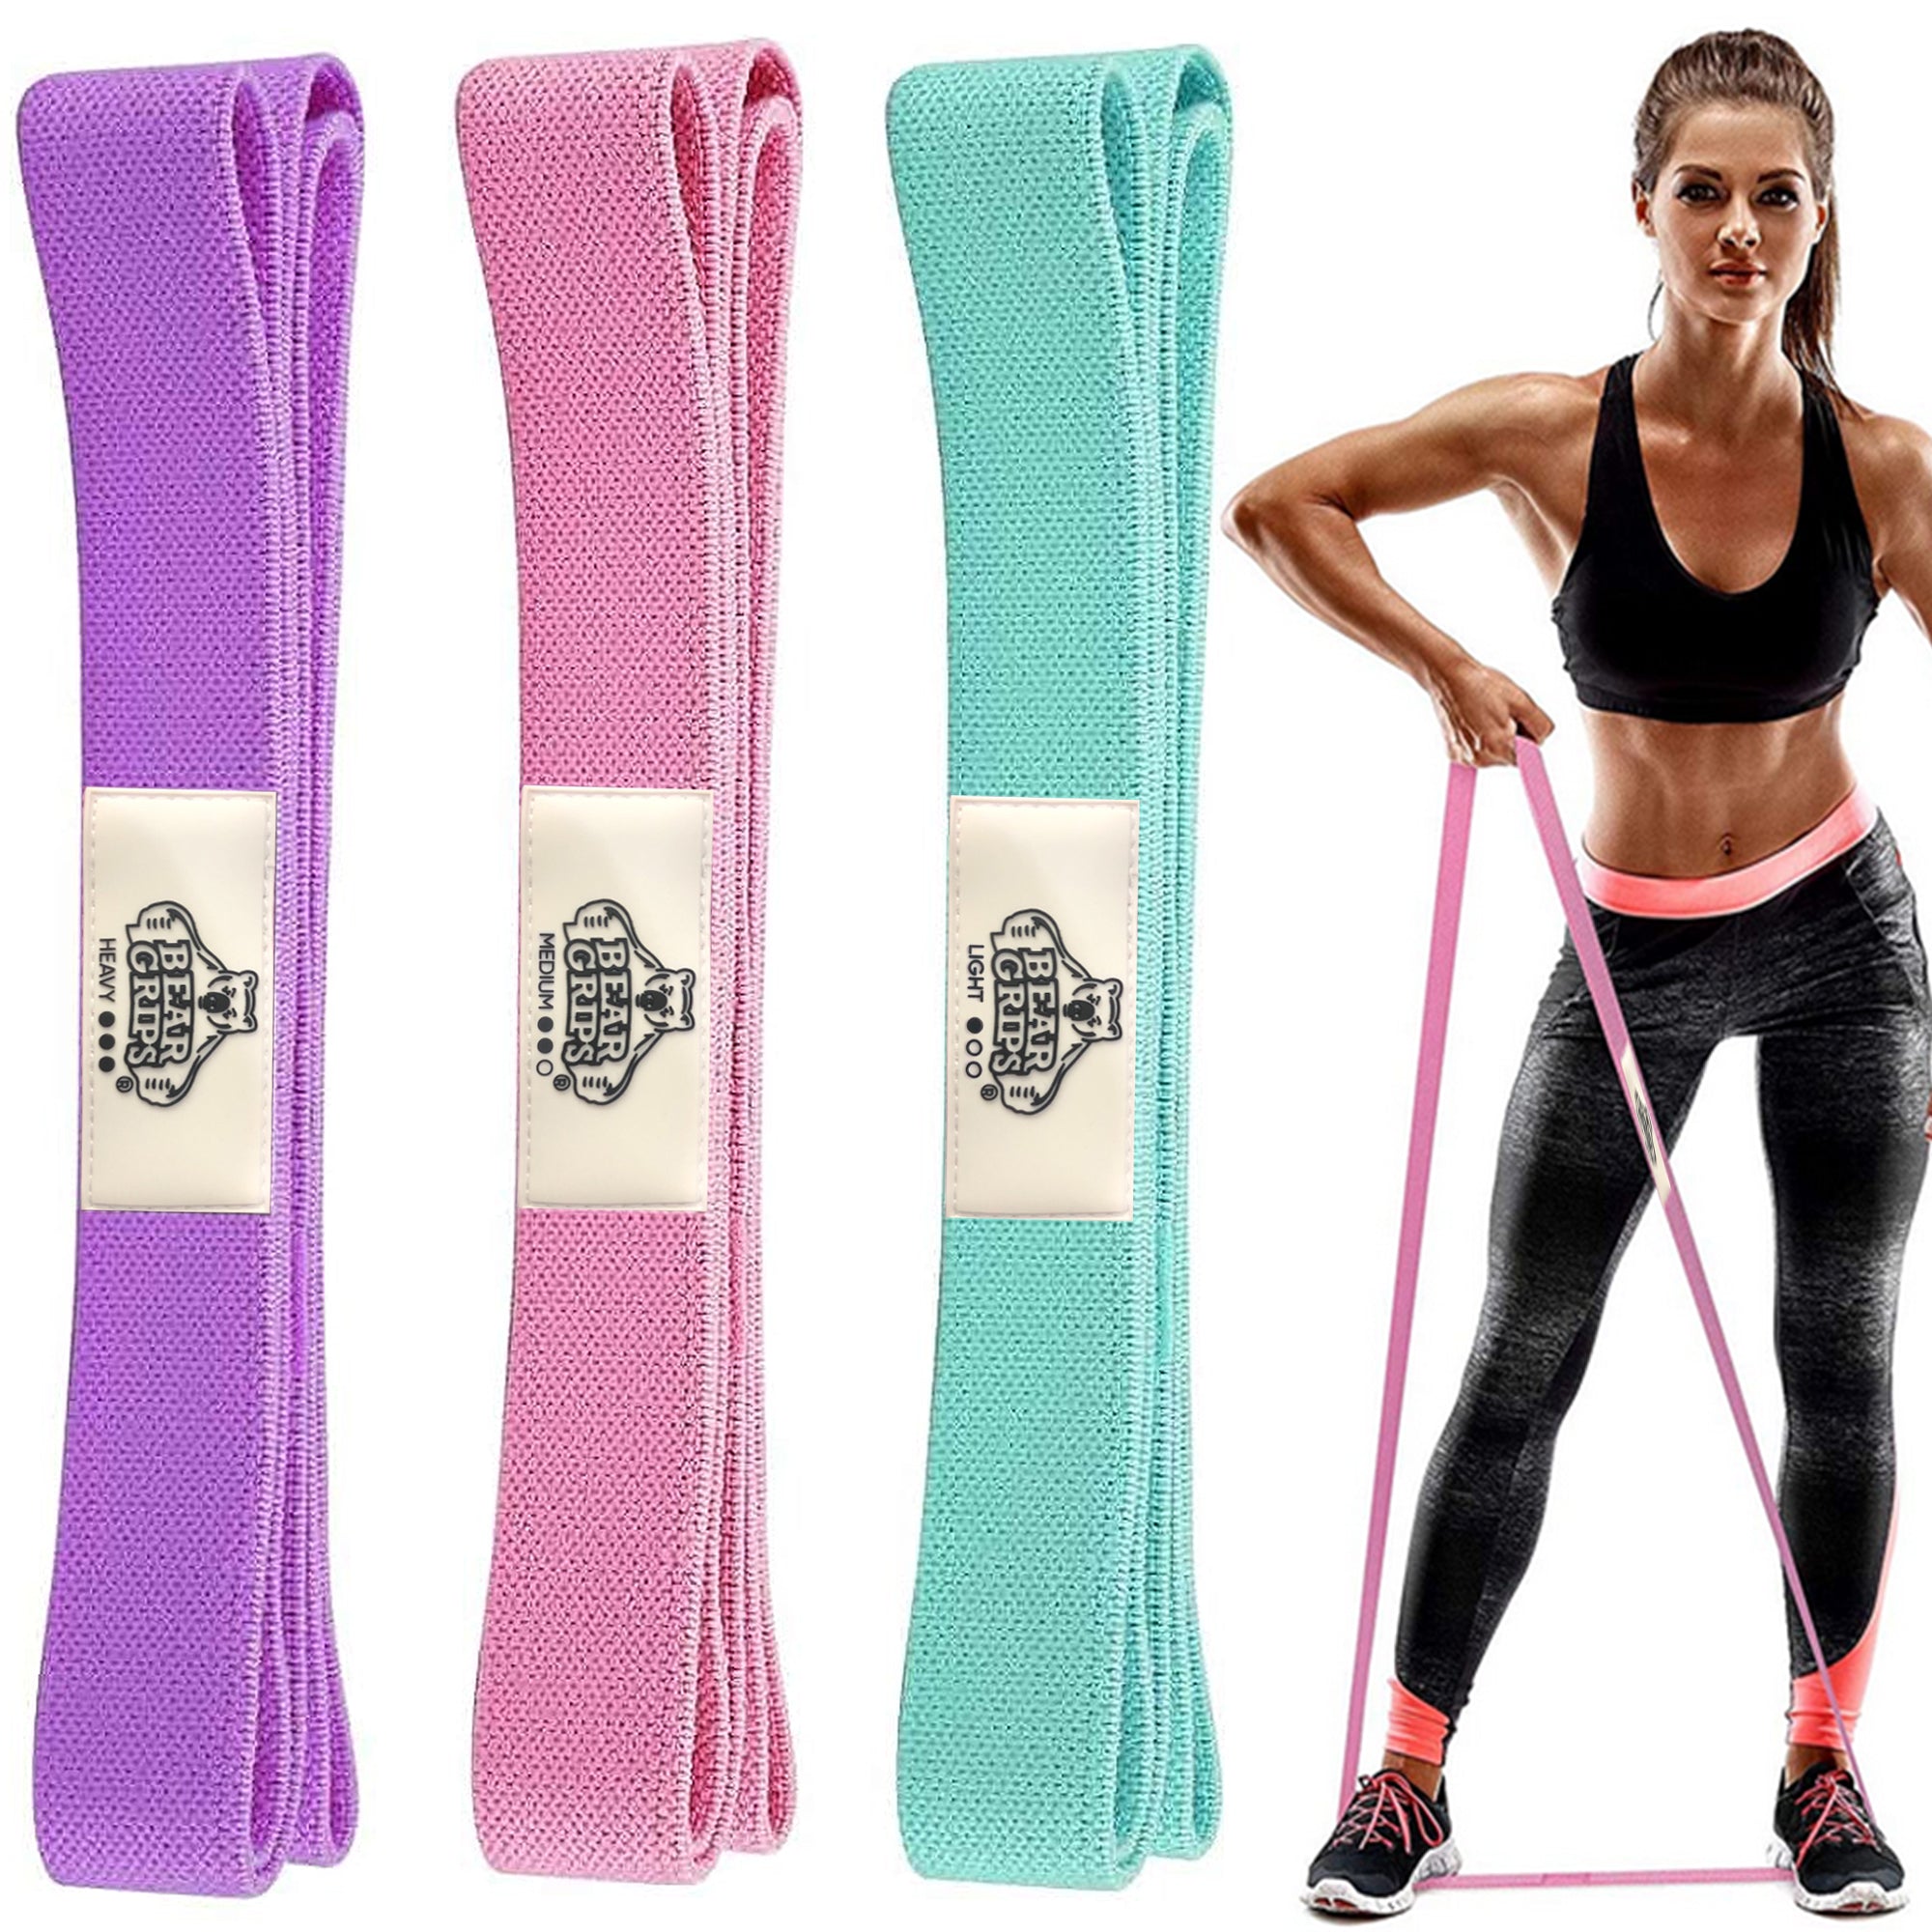 Cloth Resistance Bands - Set of 3 - Varying Resistance Levels - For Hip - Booty - Legs